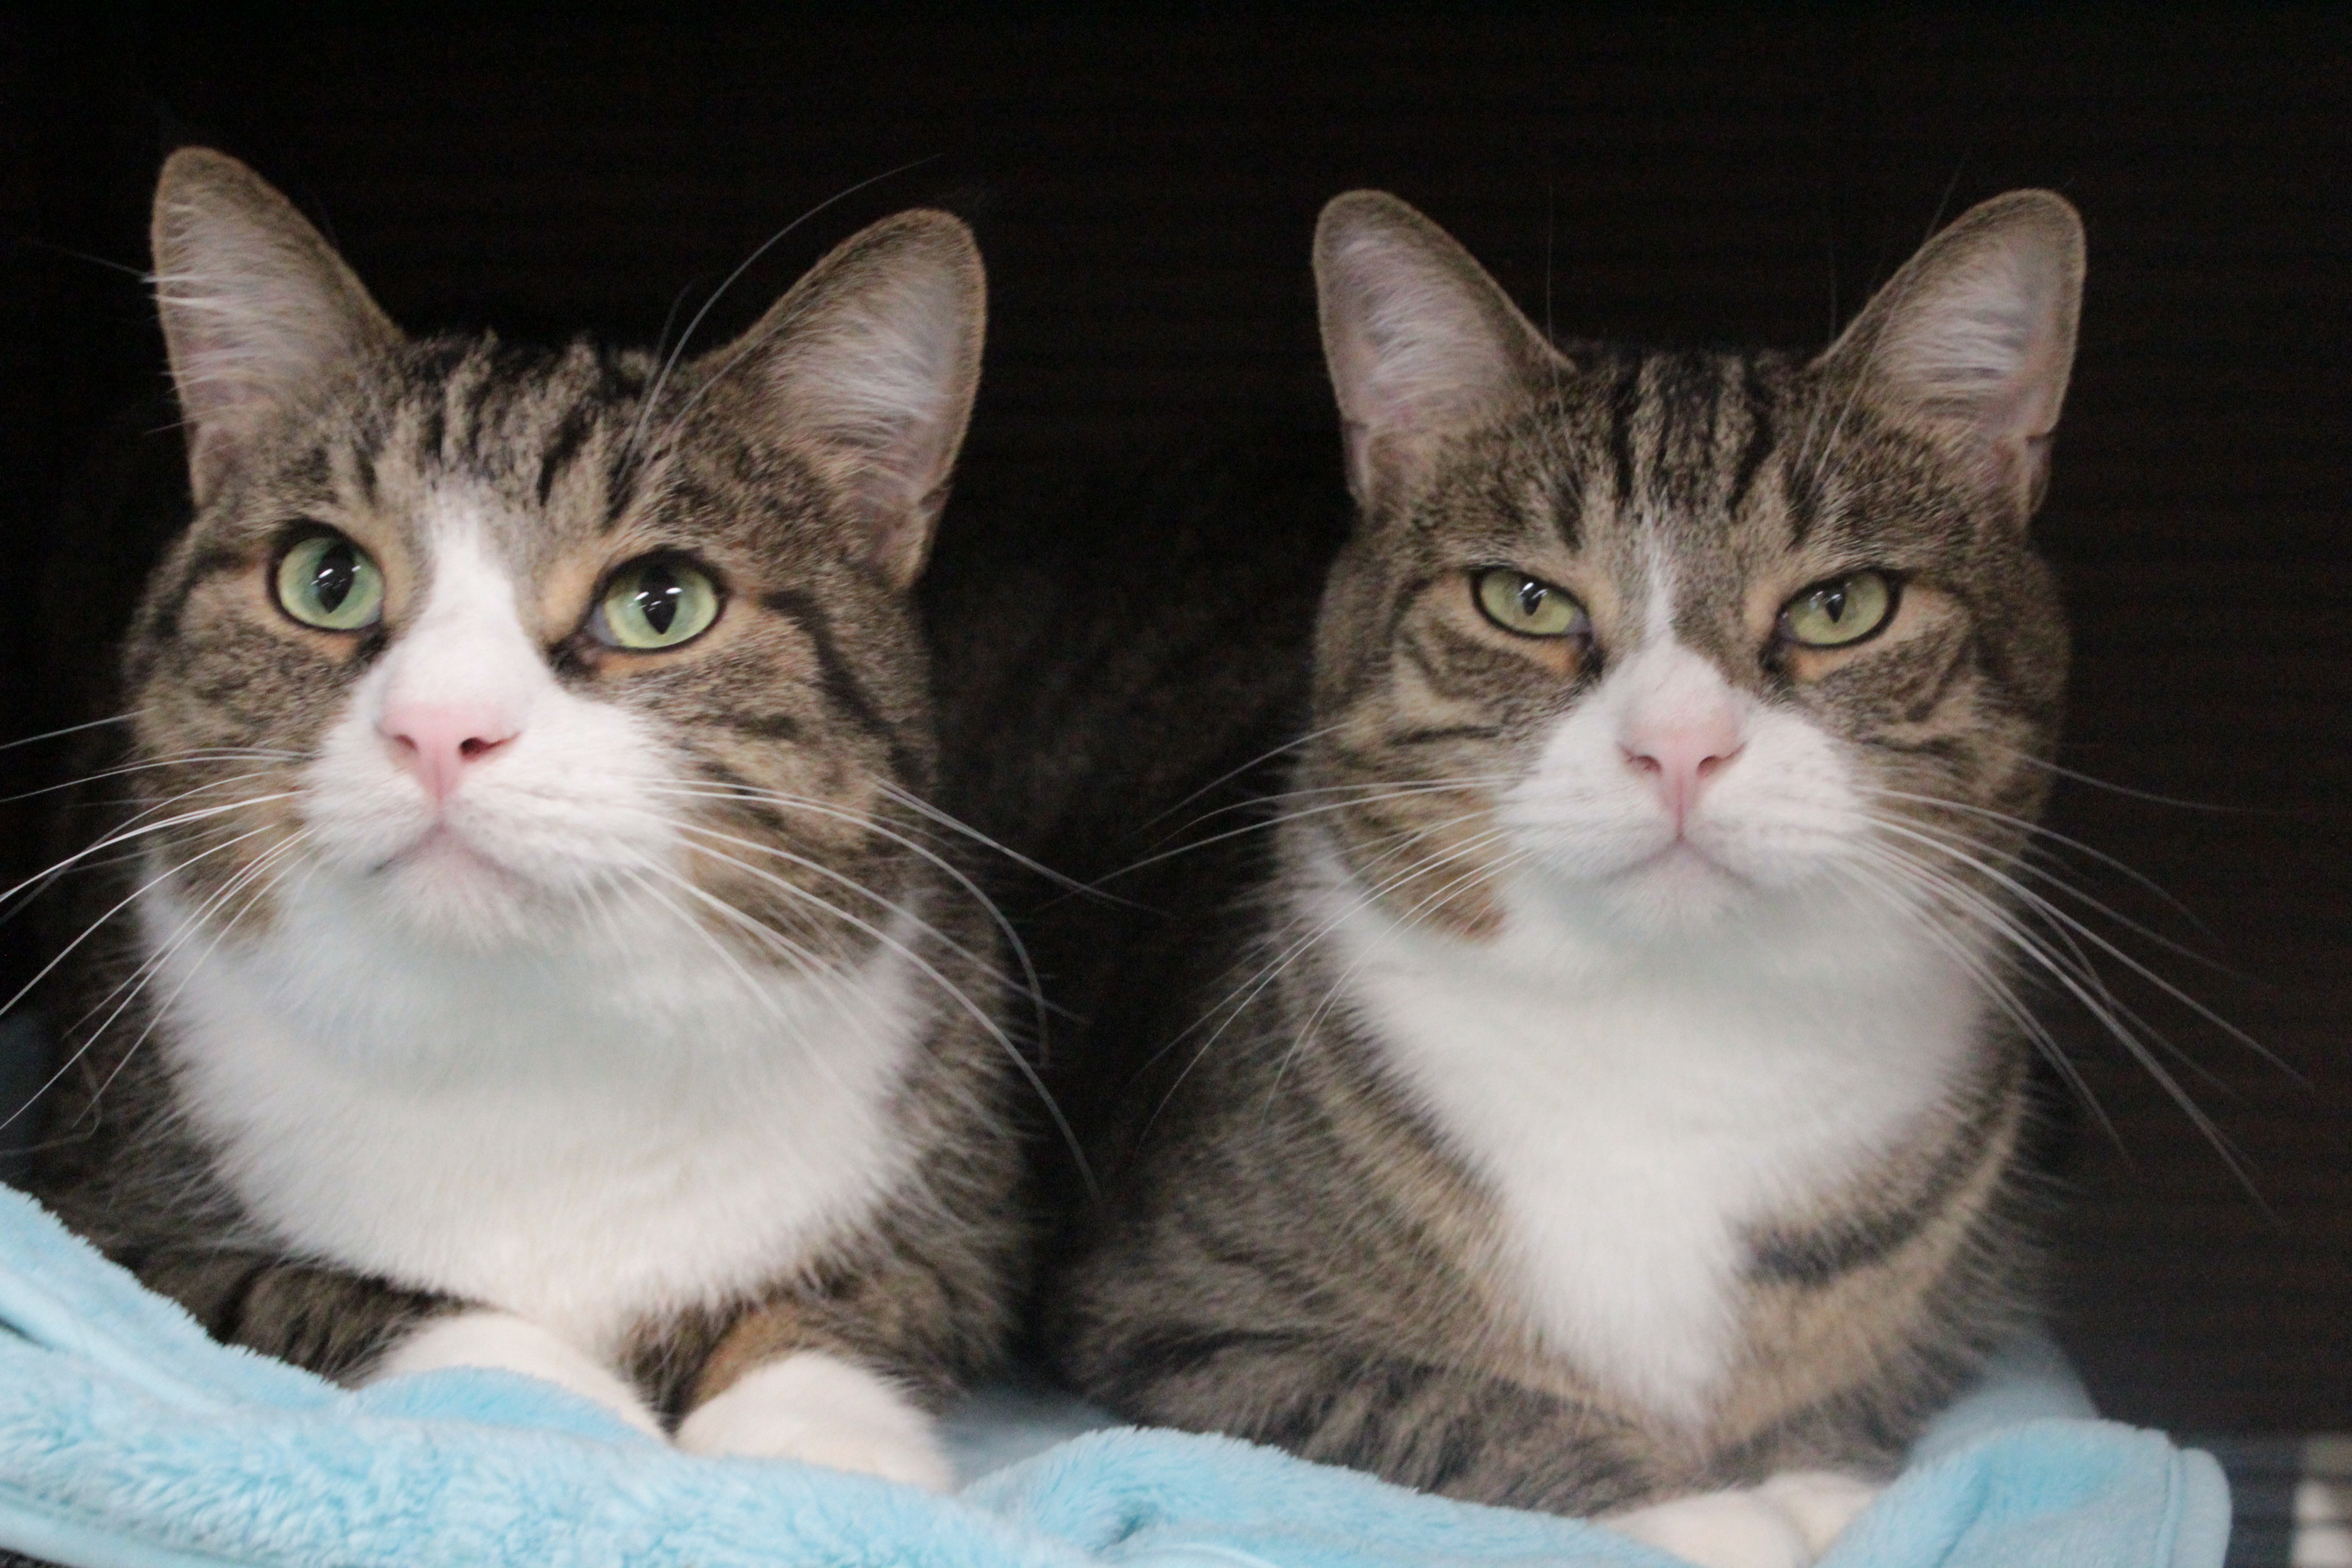 Two tabby cats sitting on a blue blanket